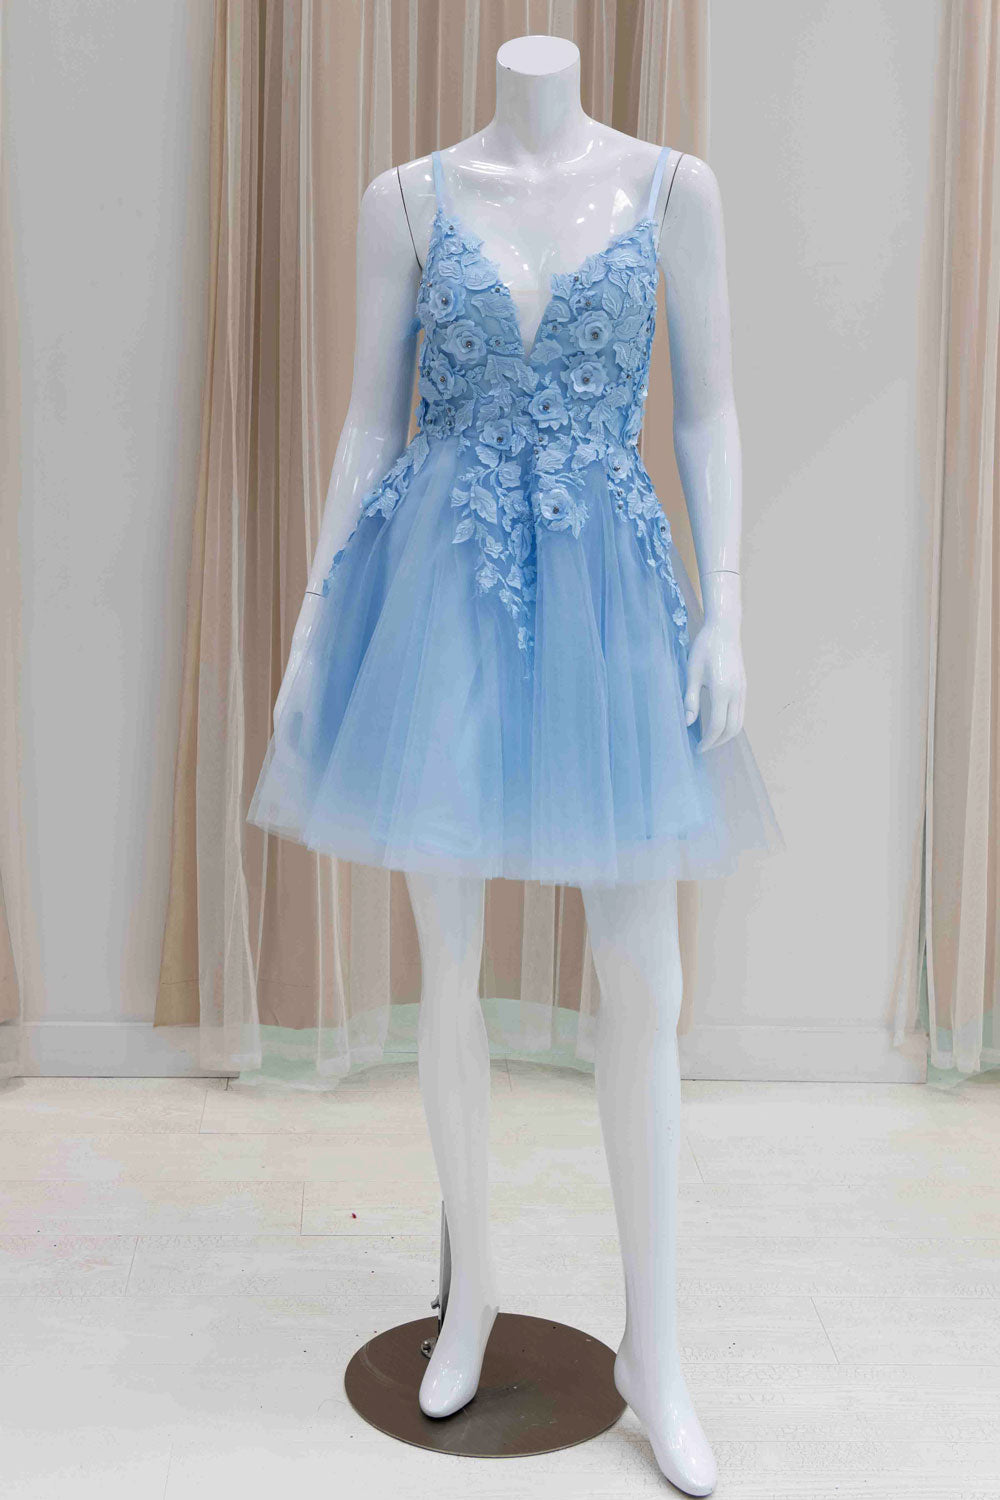 Short Fit and Flare Party Dress for Sweet 16 in Baby Blue